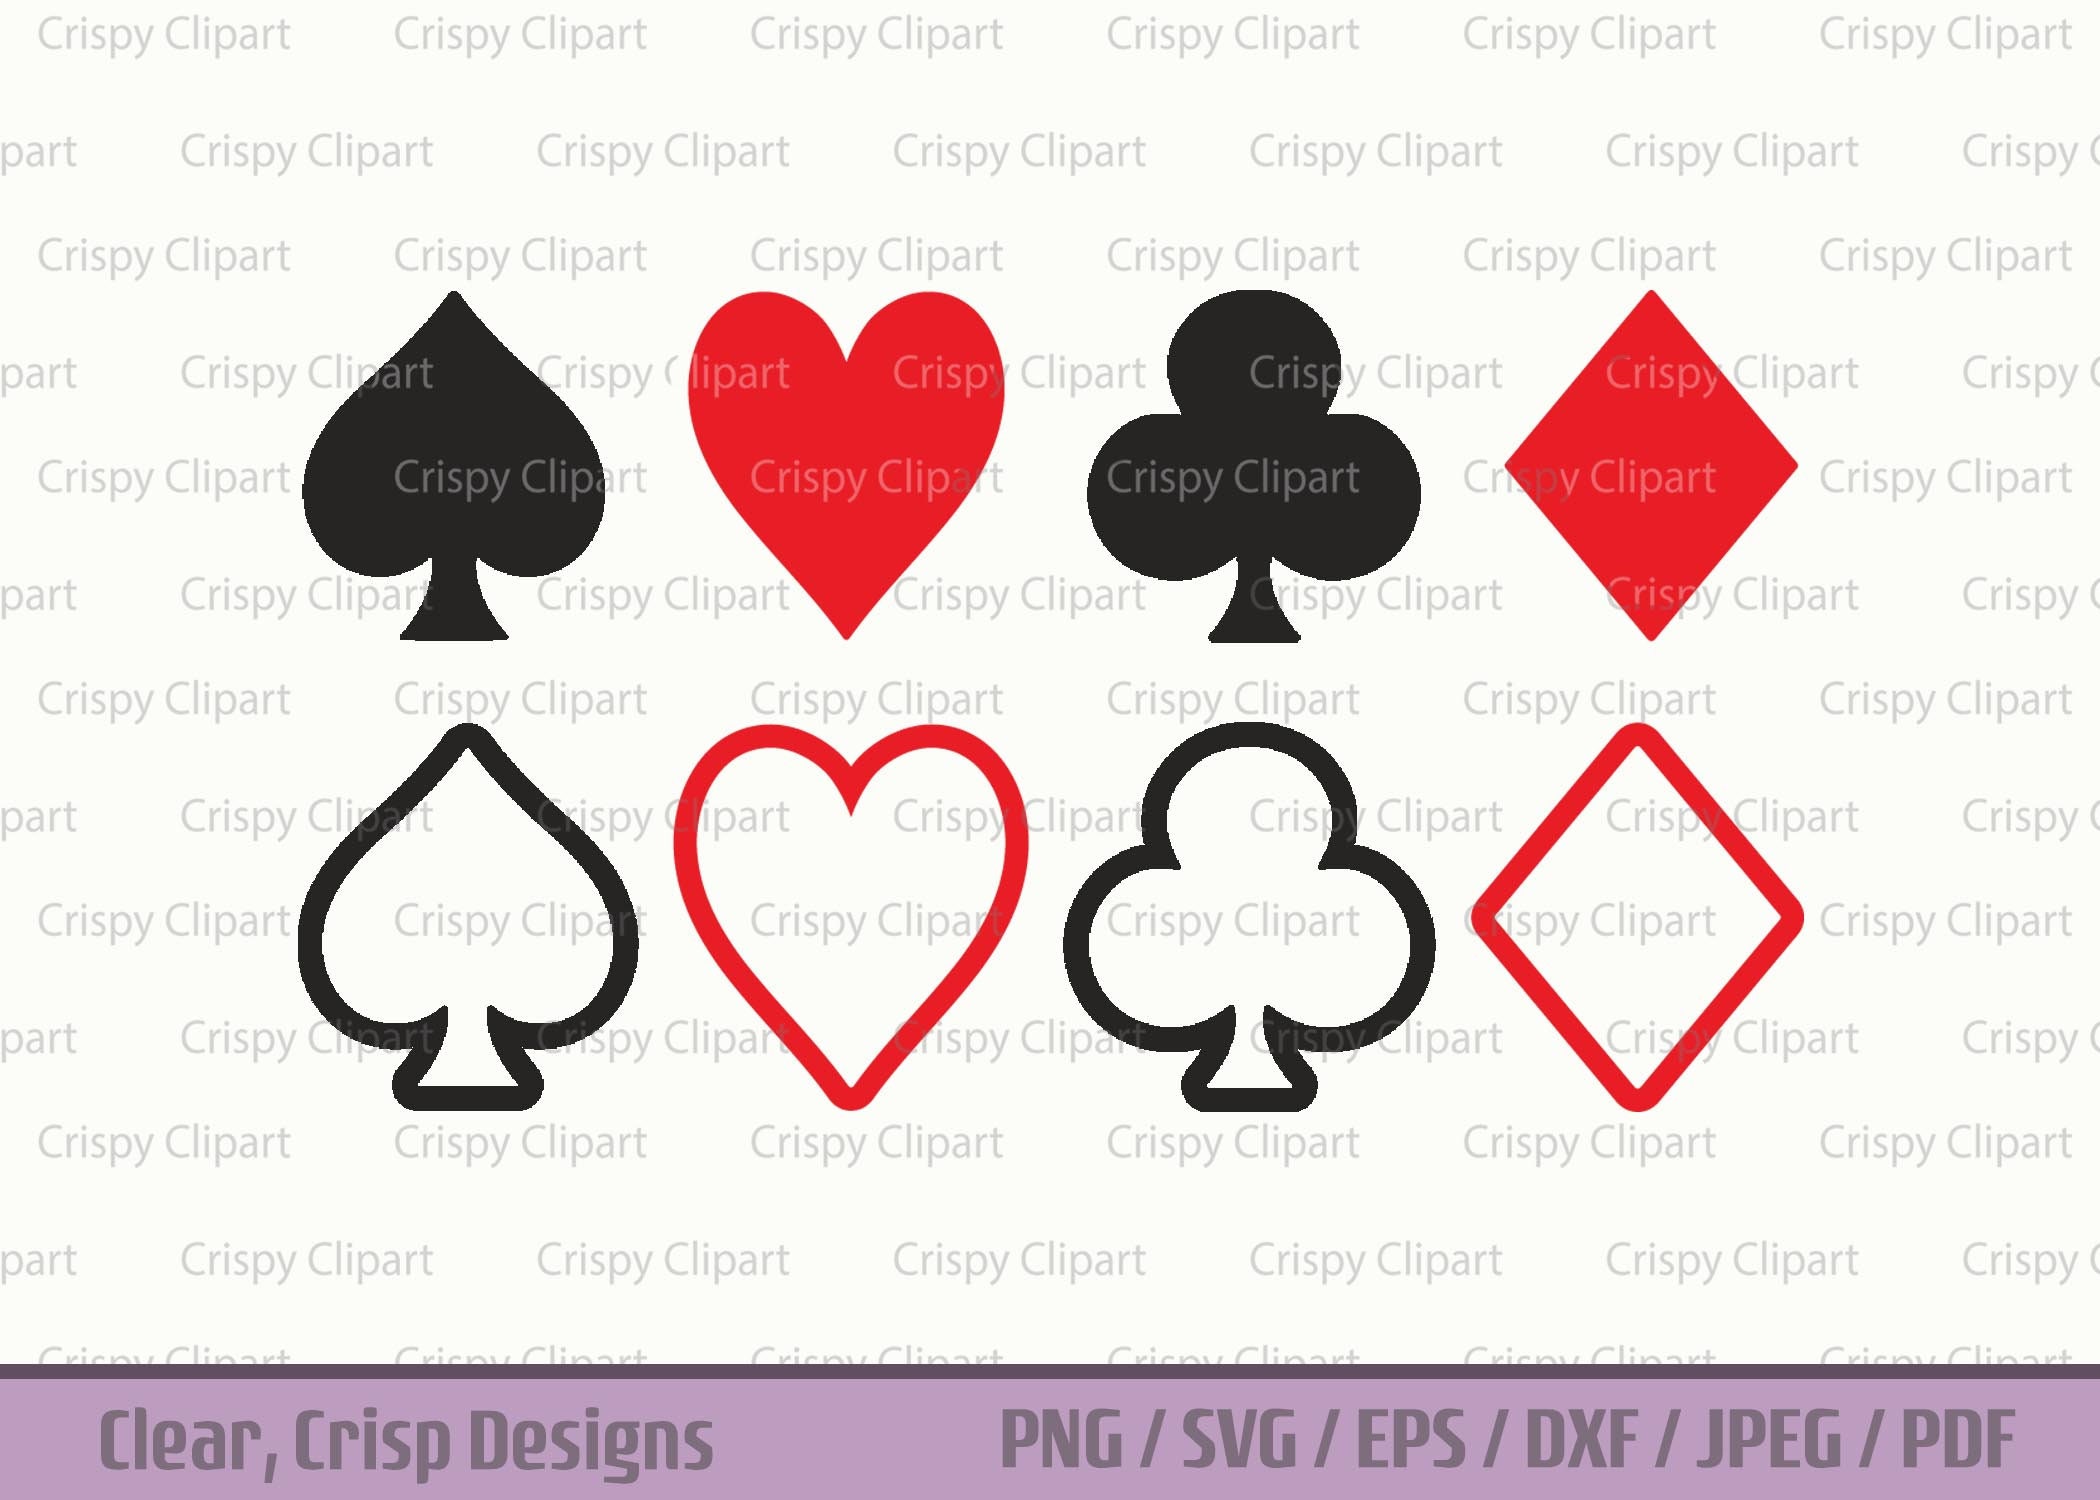 Playing Card Suits Metal Stamping Kit  Spades Heart Diamond Clover Metal  Stamps Jewelry